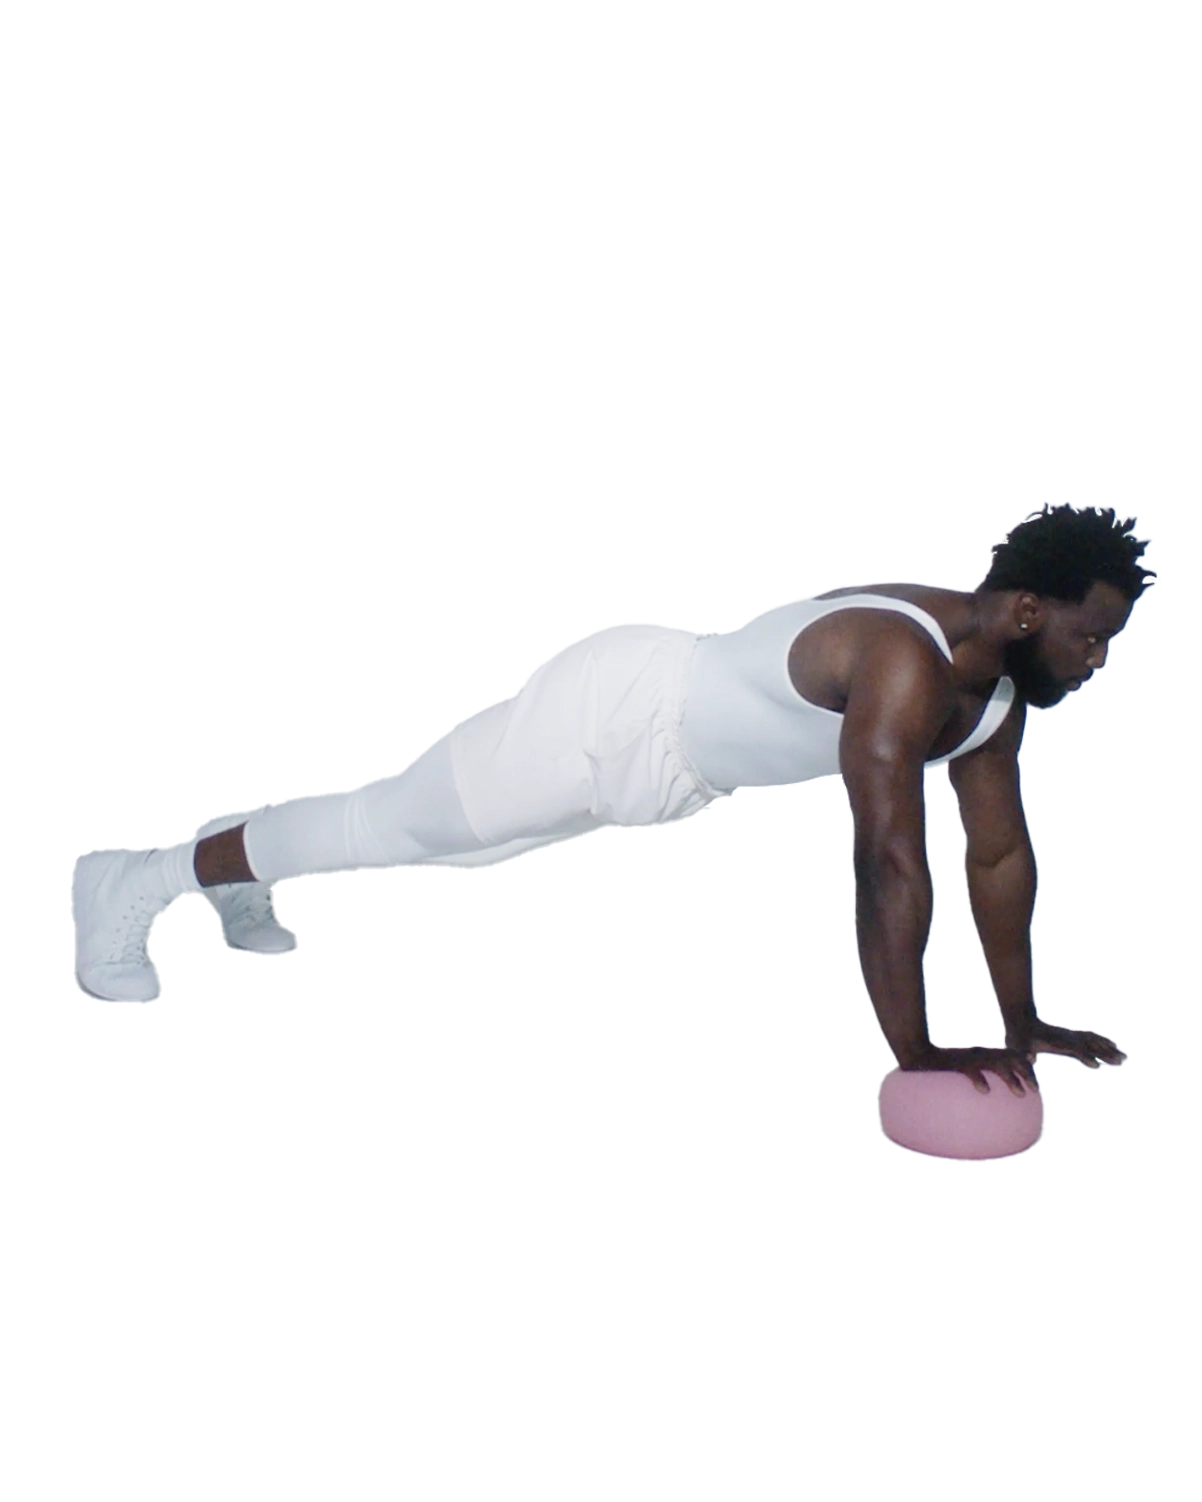 06. Elevated Push Up